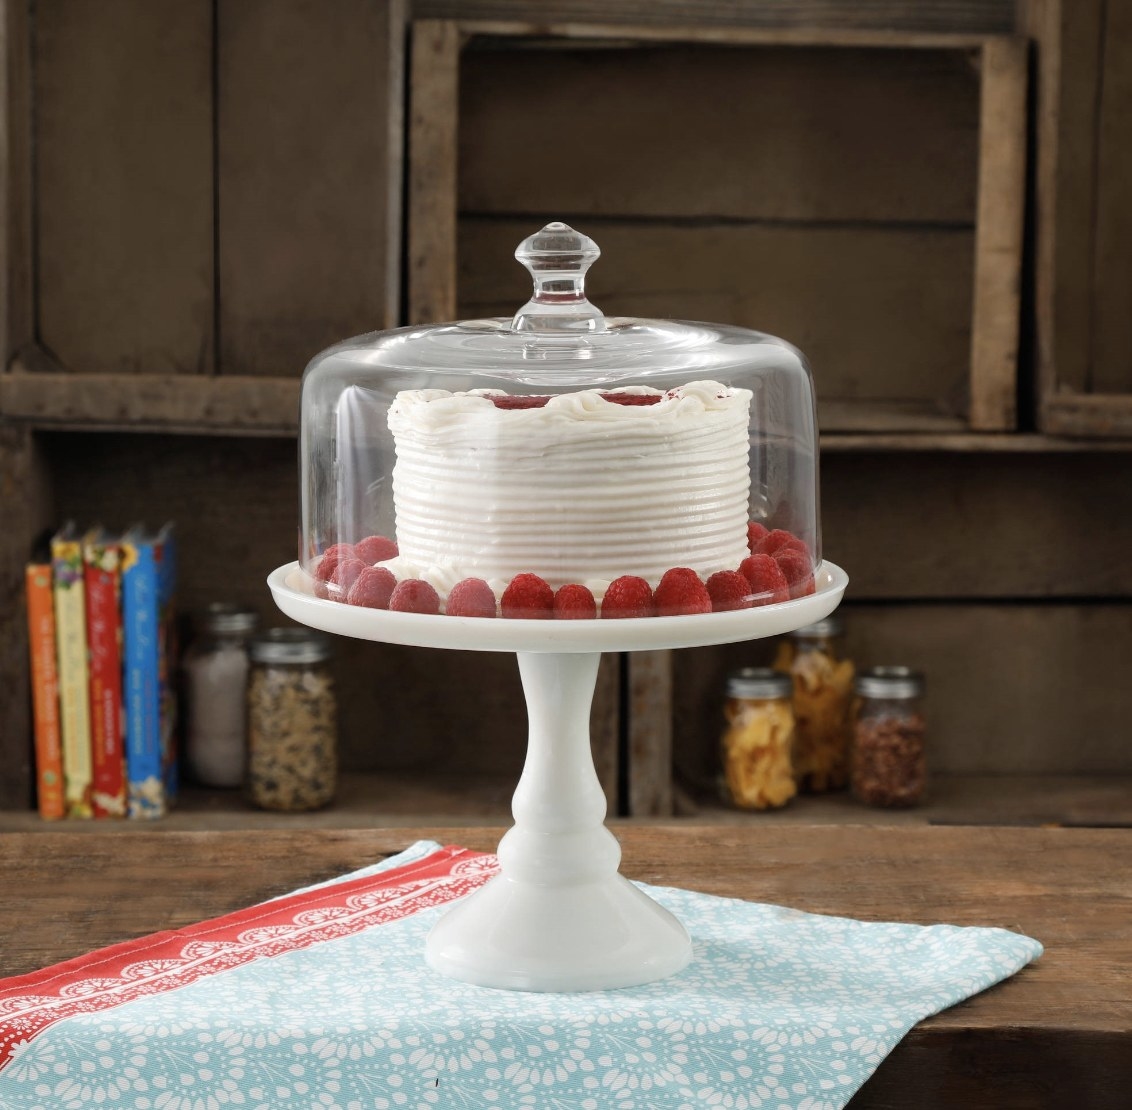 The white cake stand has a milky white base and is holding a white frosted cake with raspberries